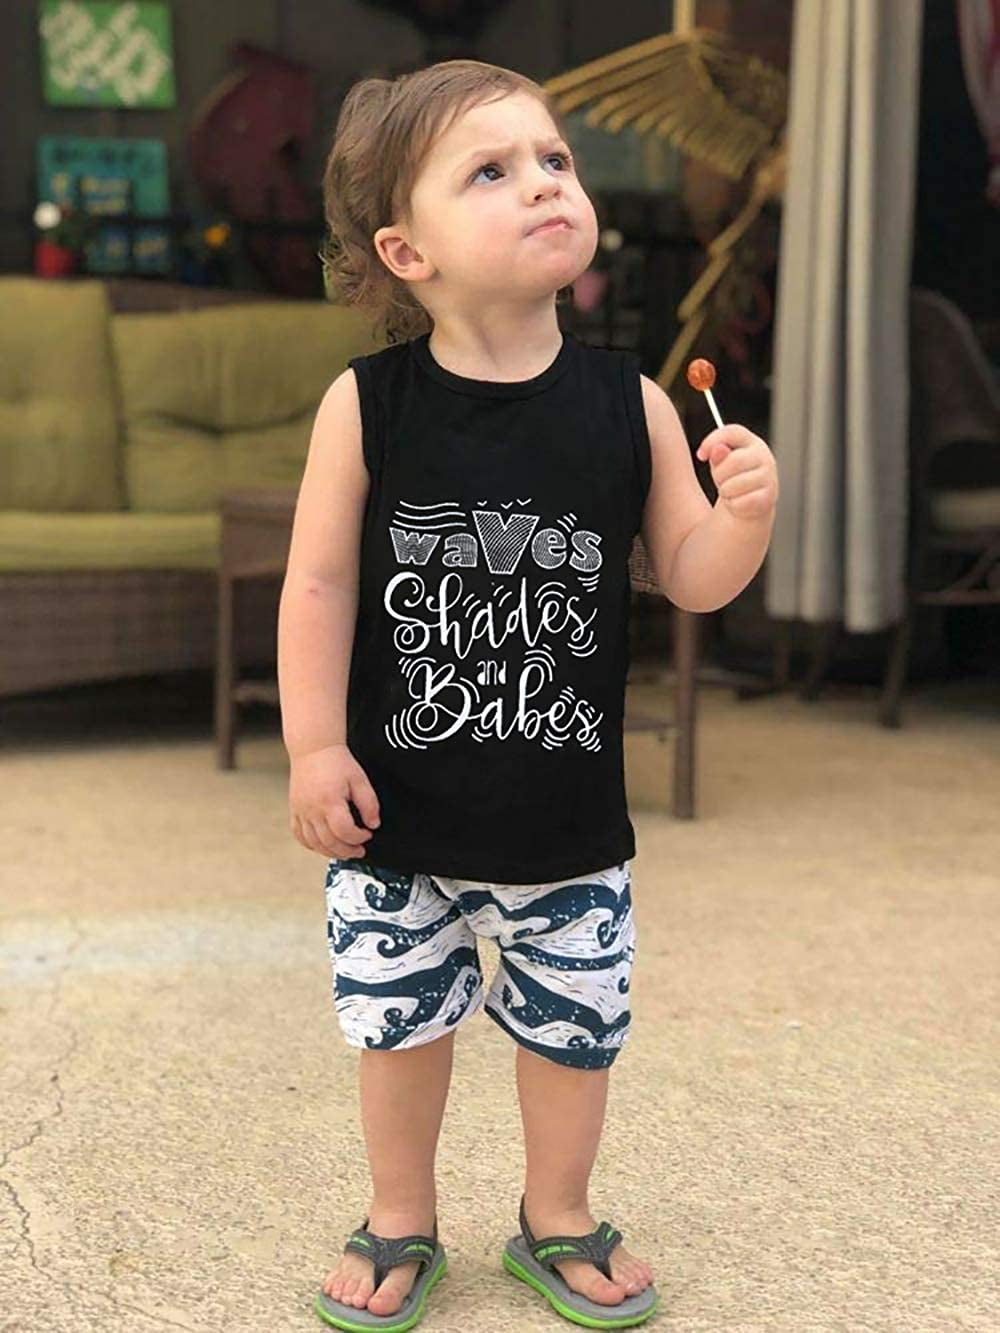 Infant Toddler Baby Boy Outfits Waves Shades and Babes Black Sleeveless Vest Top Wave Pattern Shorts Clothes Set